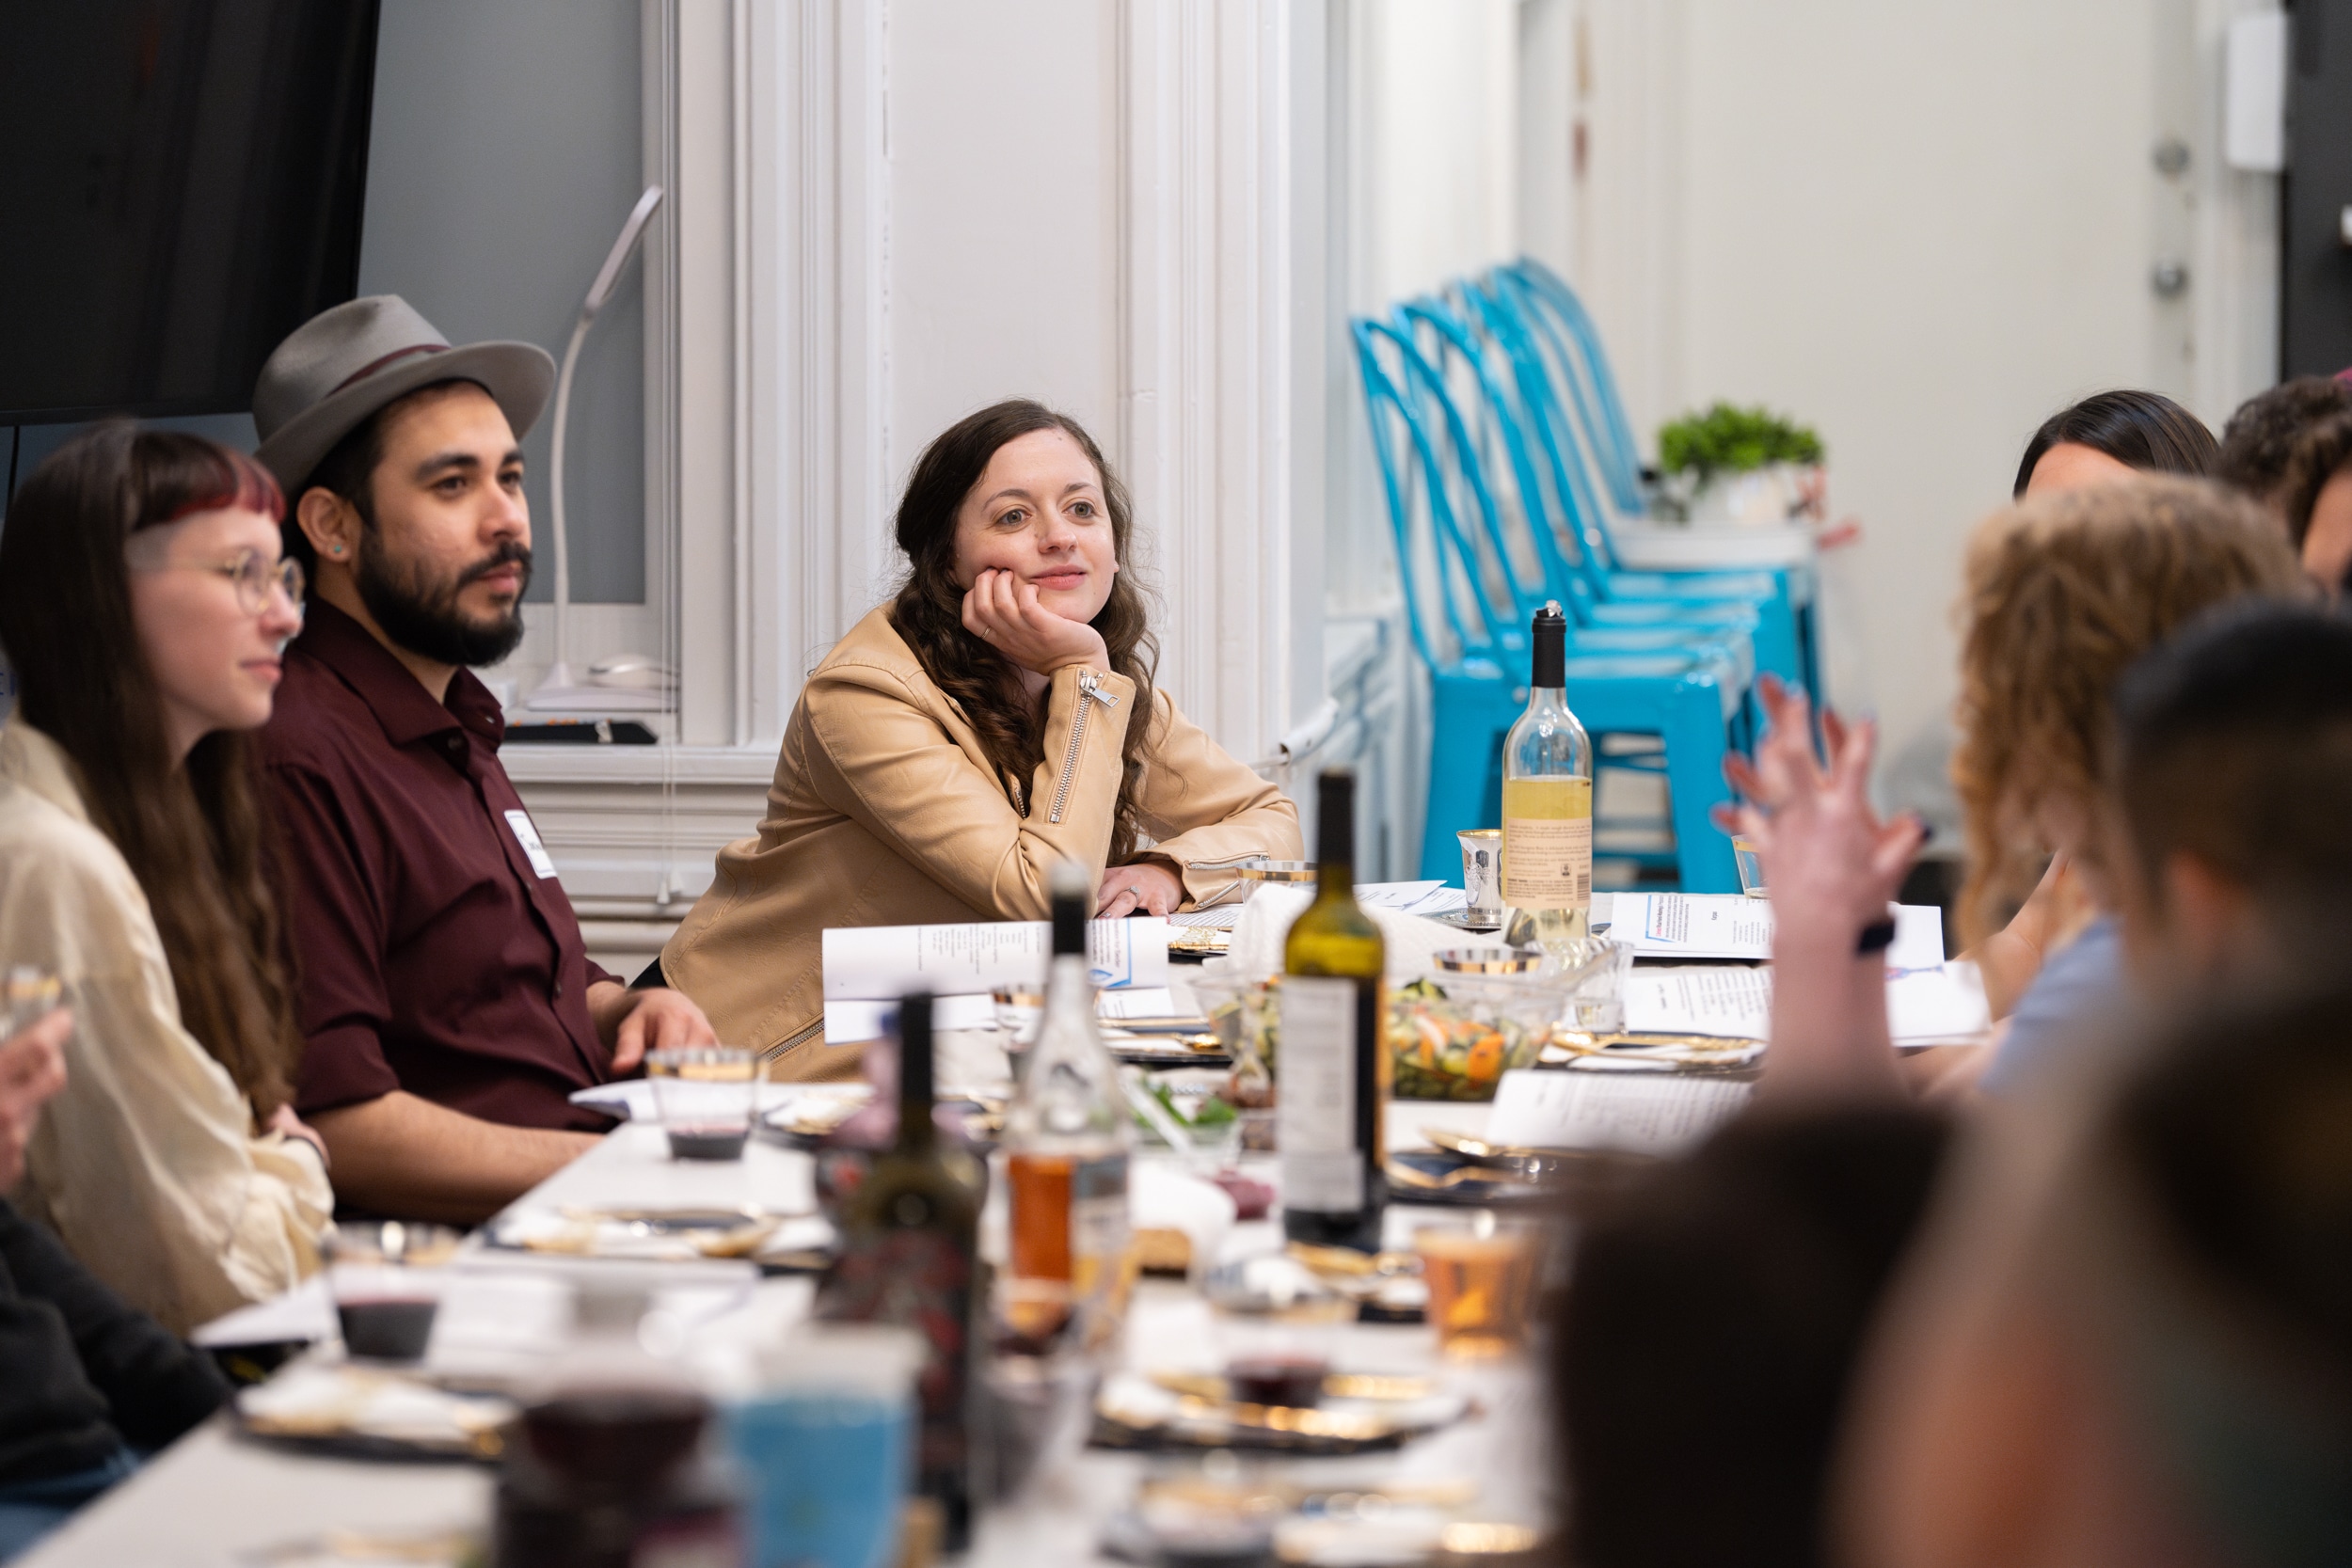 Ilana at a Passover Seder in the Gather townhouse.